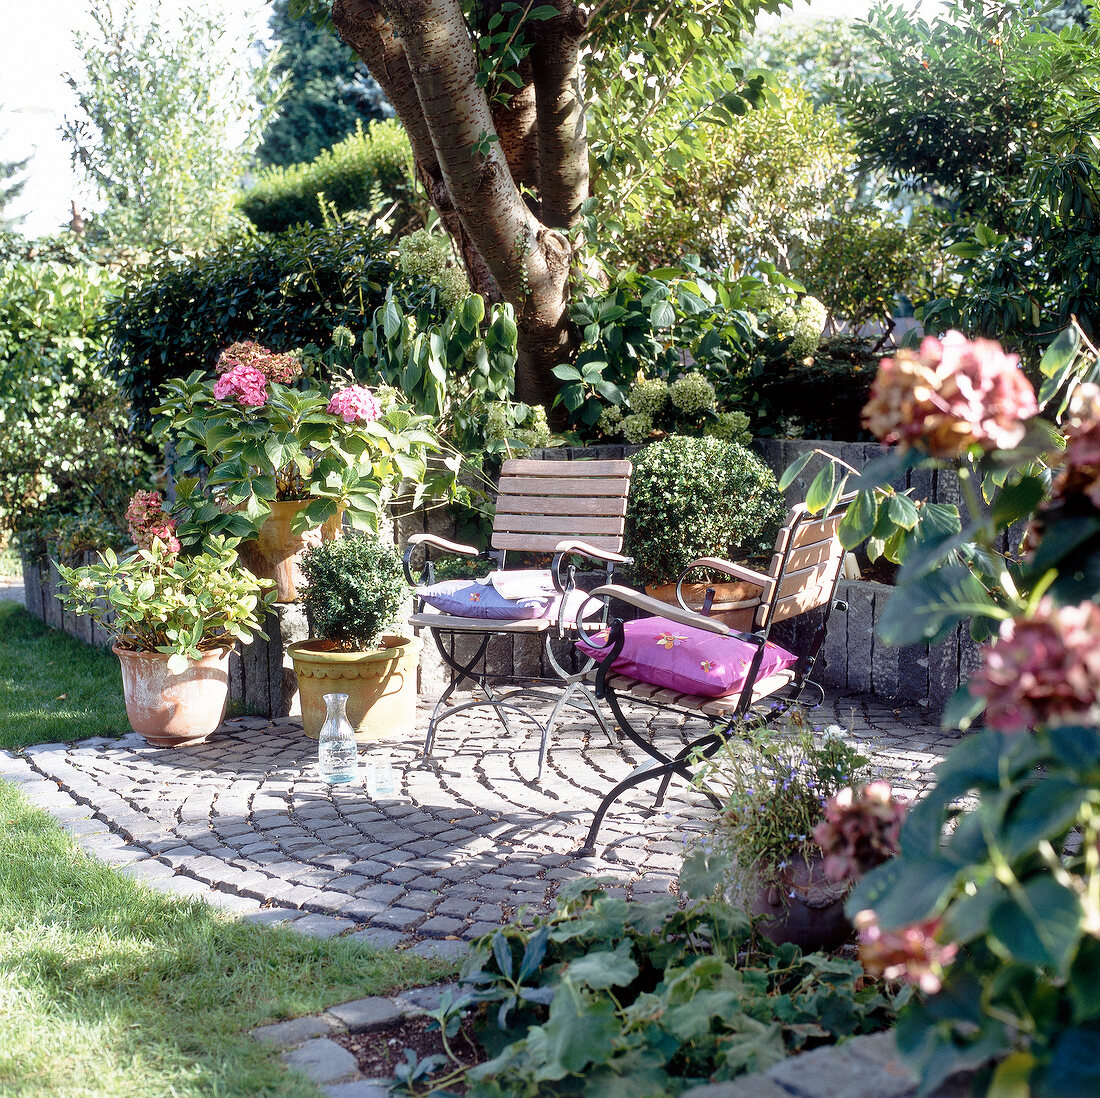 Two chairs on paved ground surrounded by garden plants